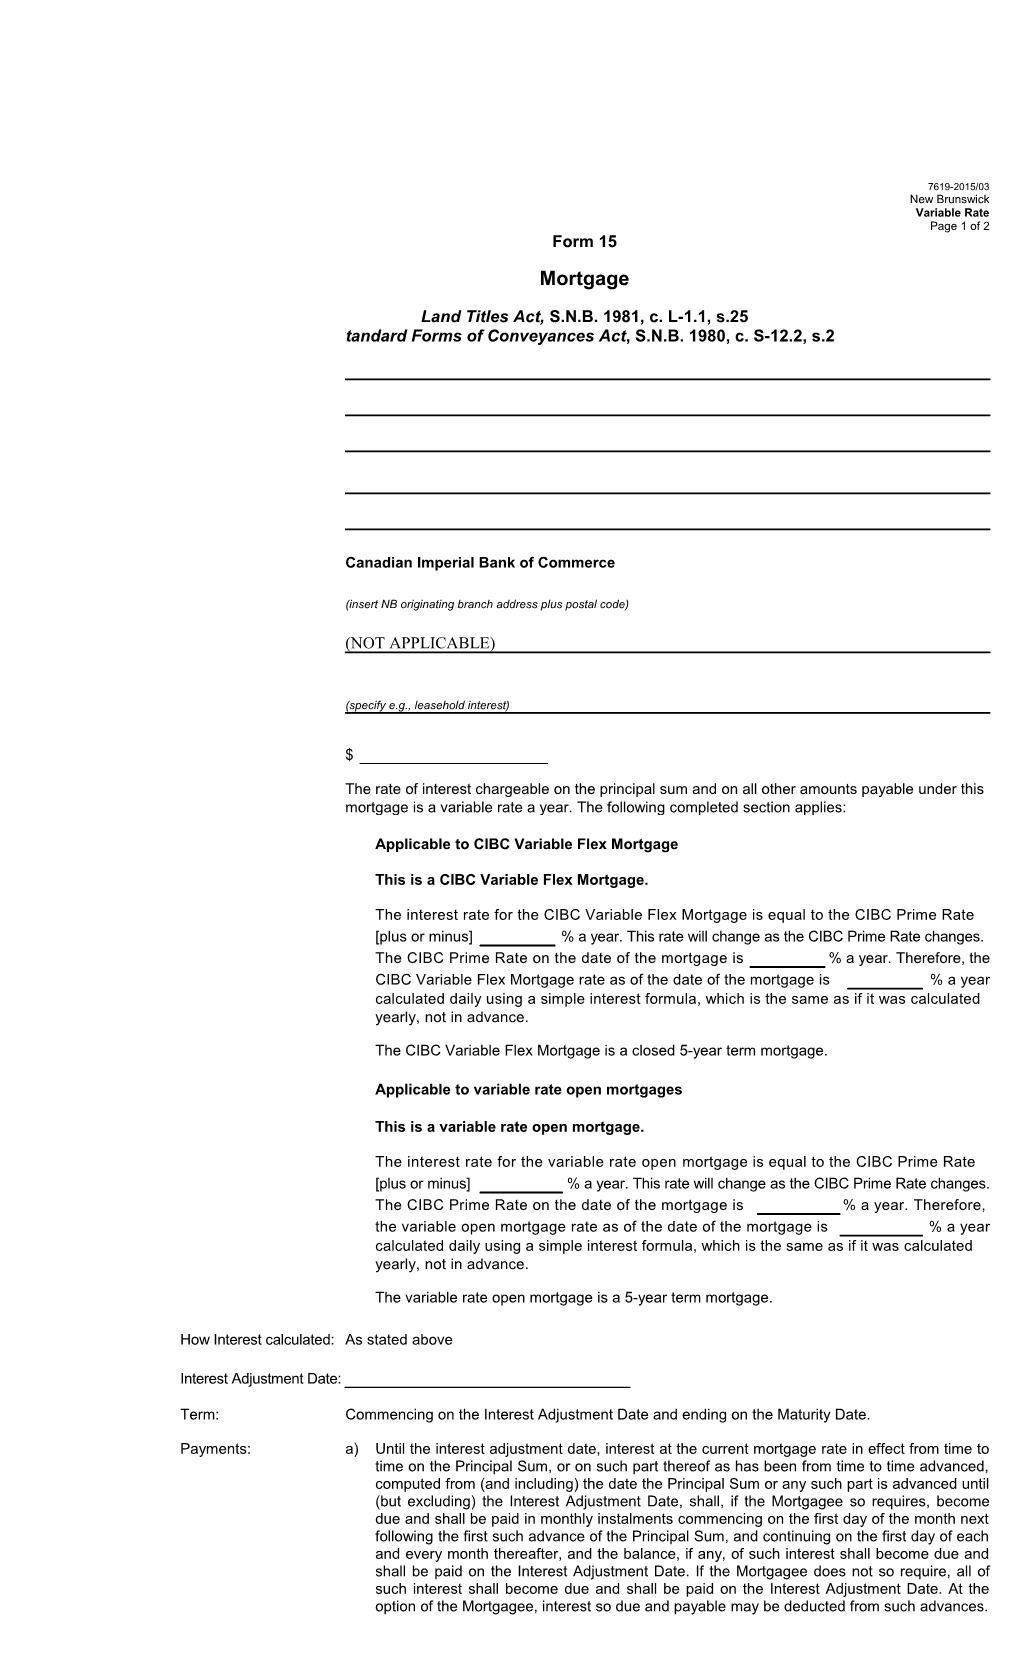 Mortgage - Form 15 - Variable Rate (7619 New Brunswick-2015/03)